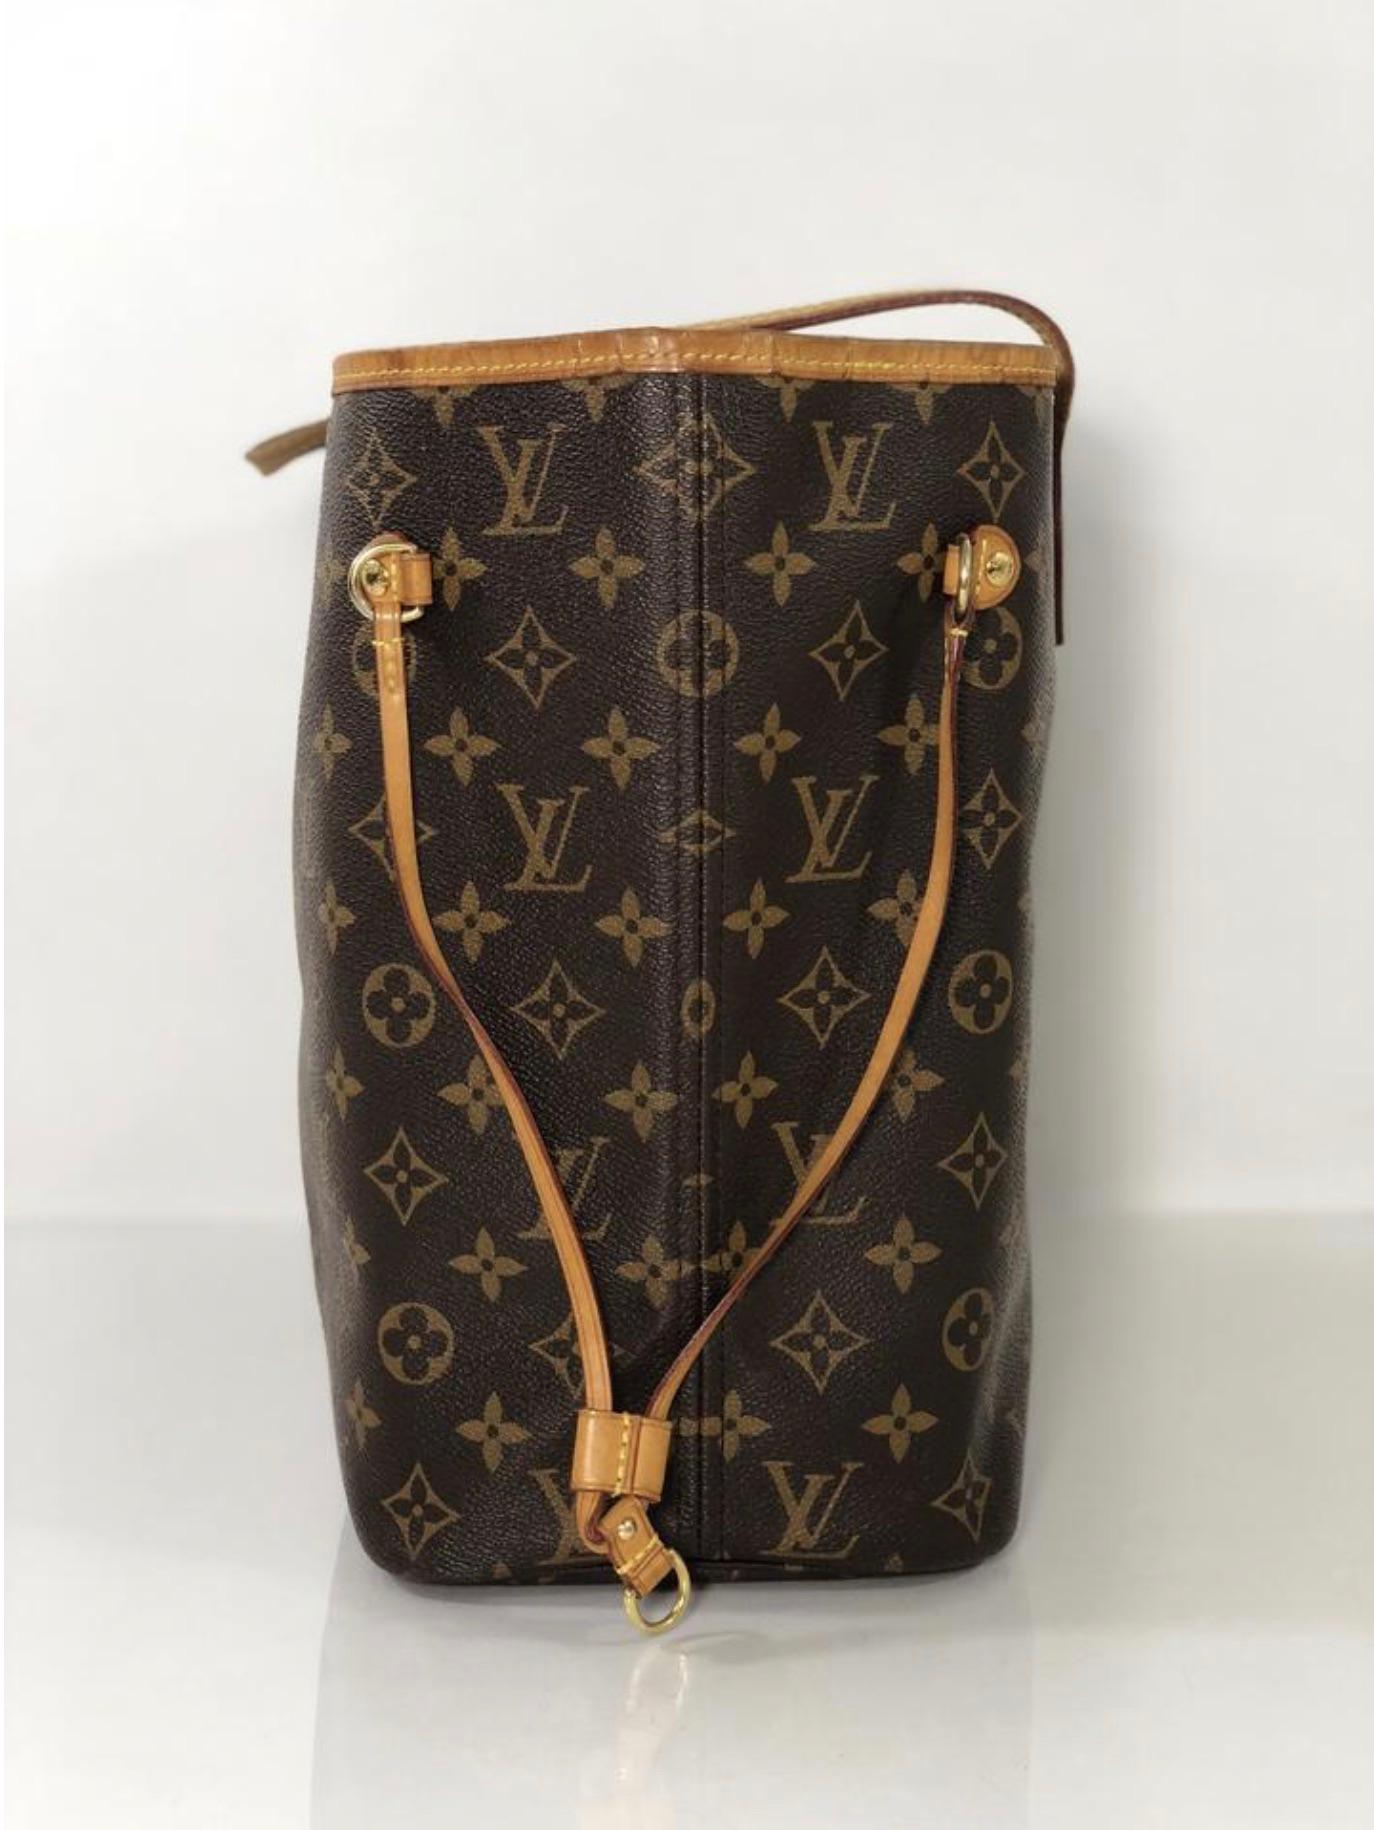 Louis Vuitton Monogram Neverfull MM Tote Shoulder Handbag In Good Condition For Sale In Saint Charles, IL